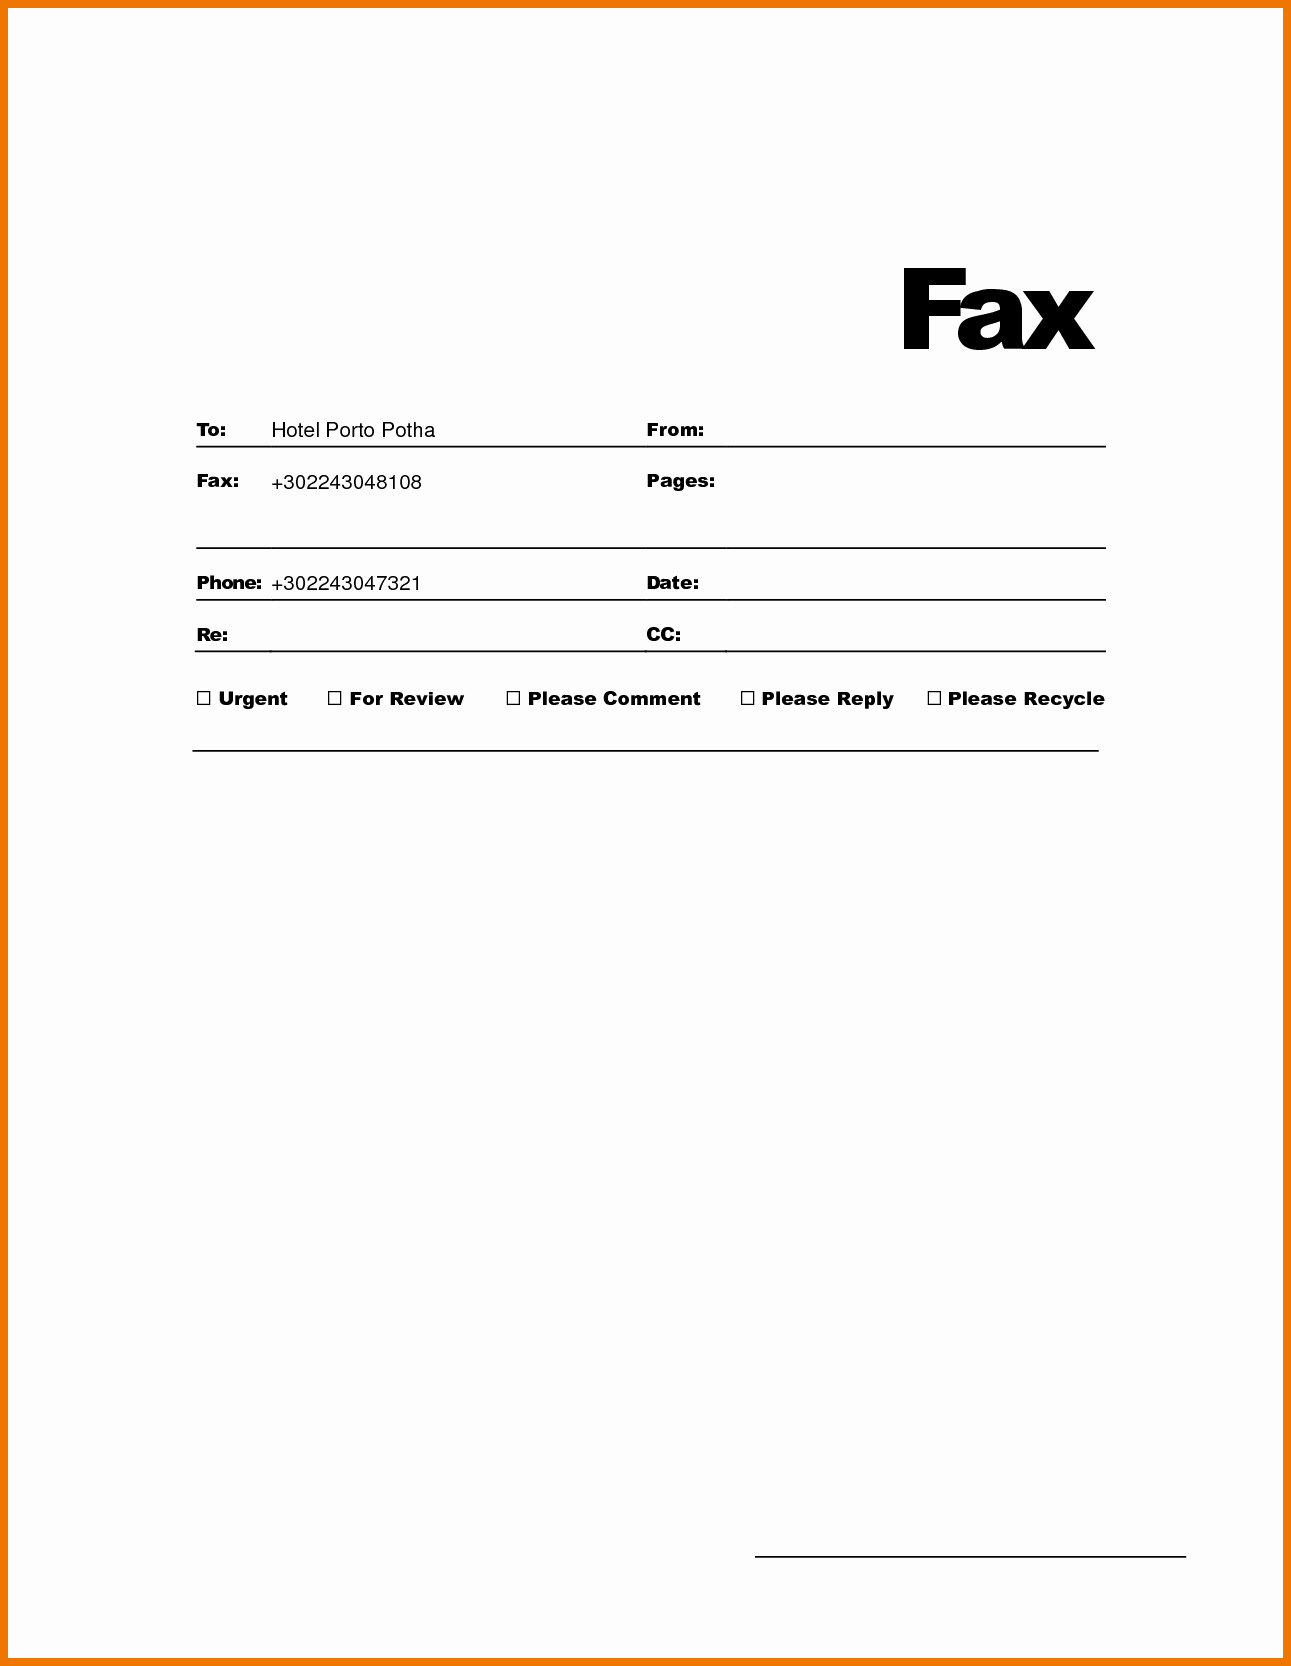 Fax Cover Sheet Template Word Elegant solarfile Blog